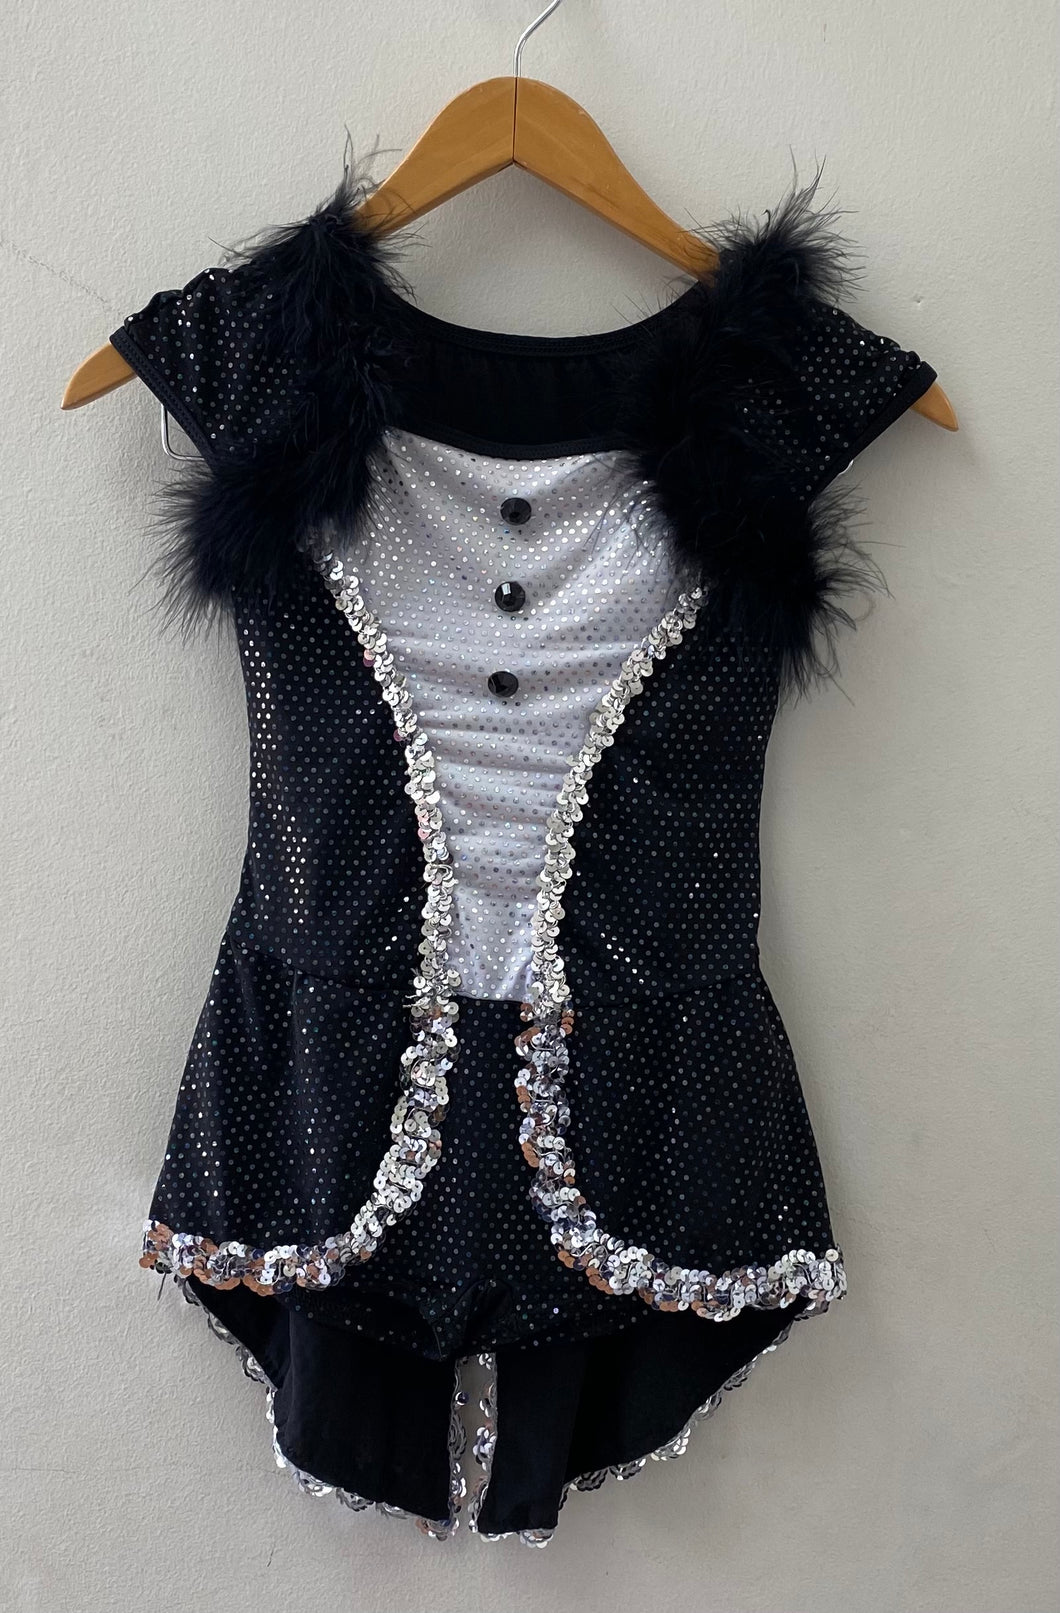 Black & White Glitter Costume with Feathers